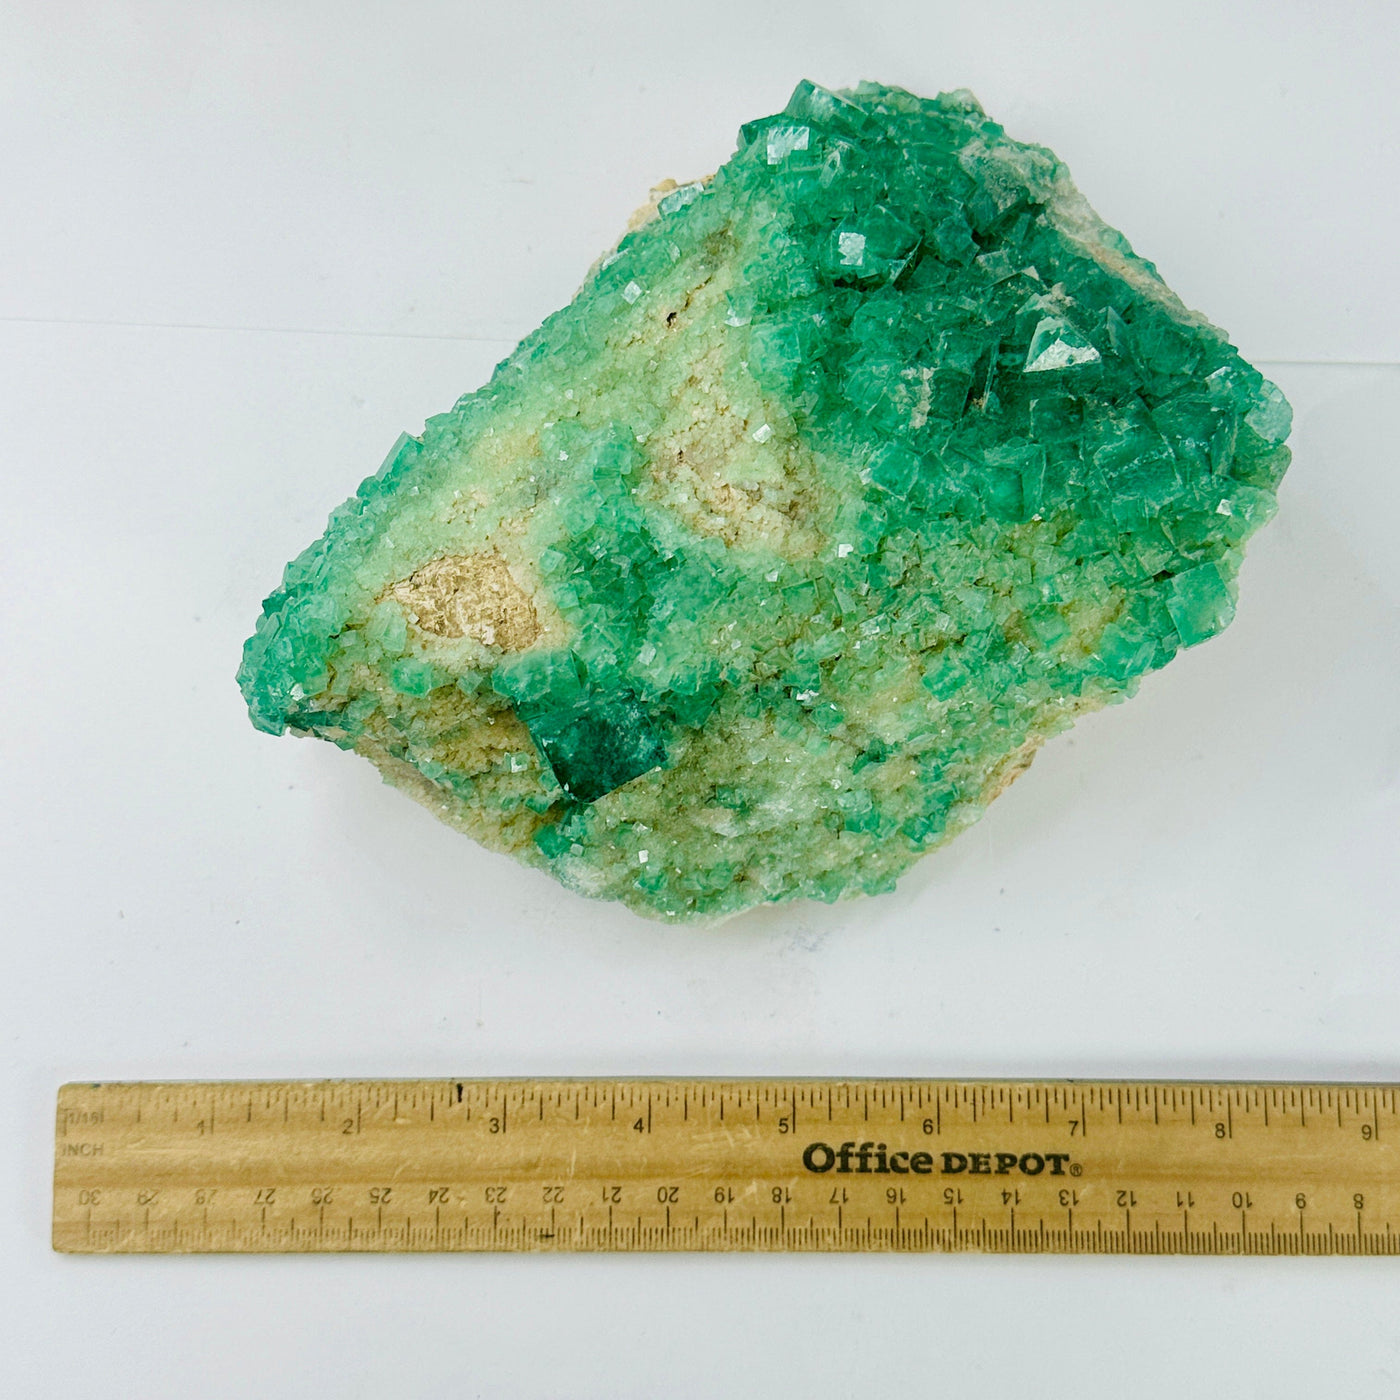 Cubic Fluorite Cluster with ruler for size reference